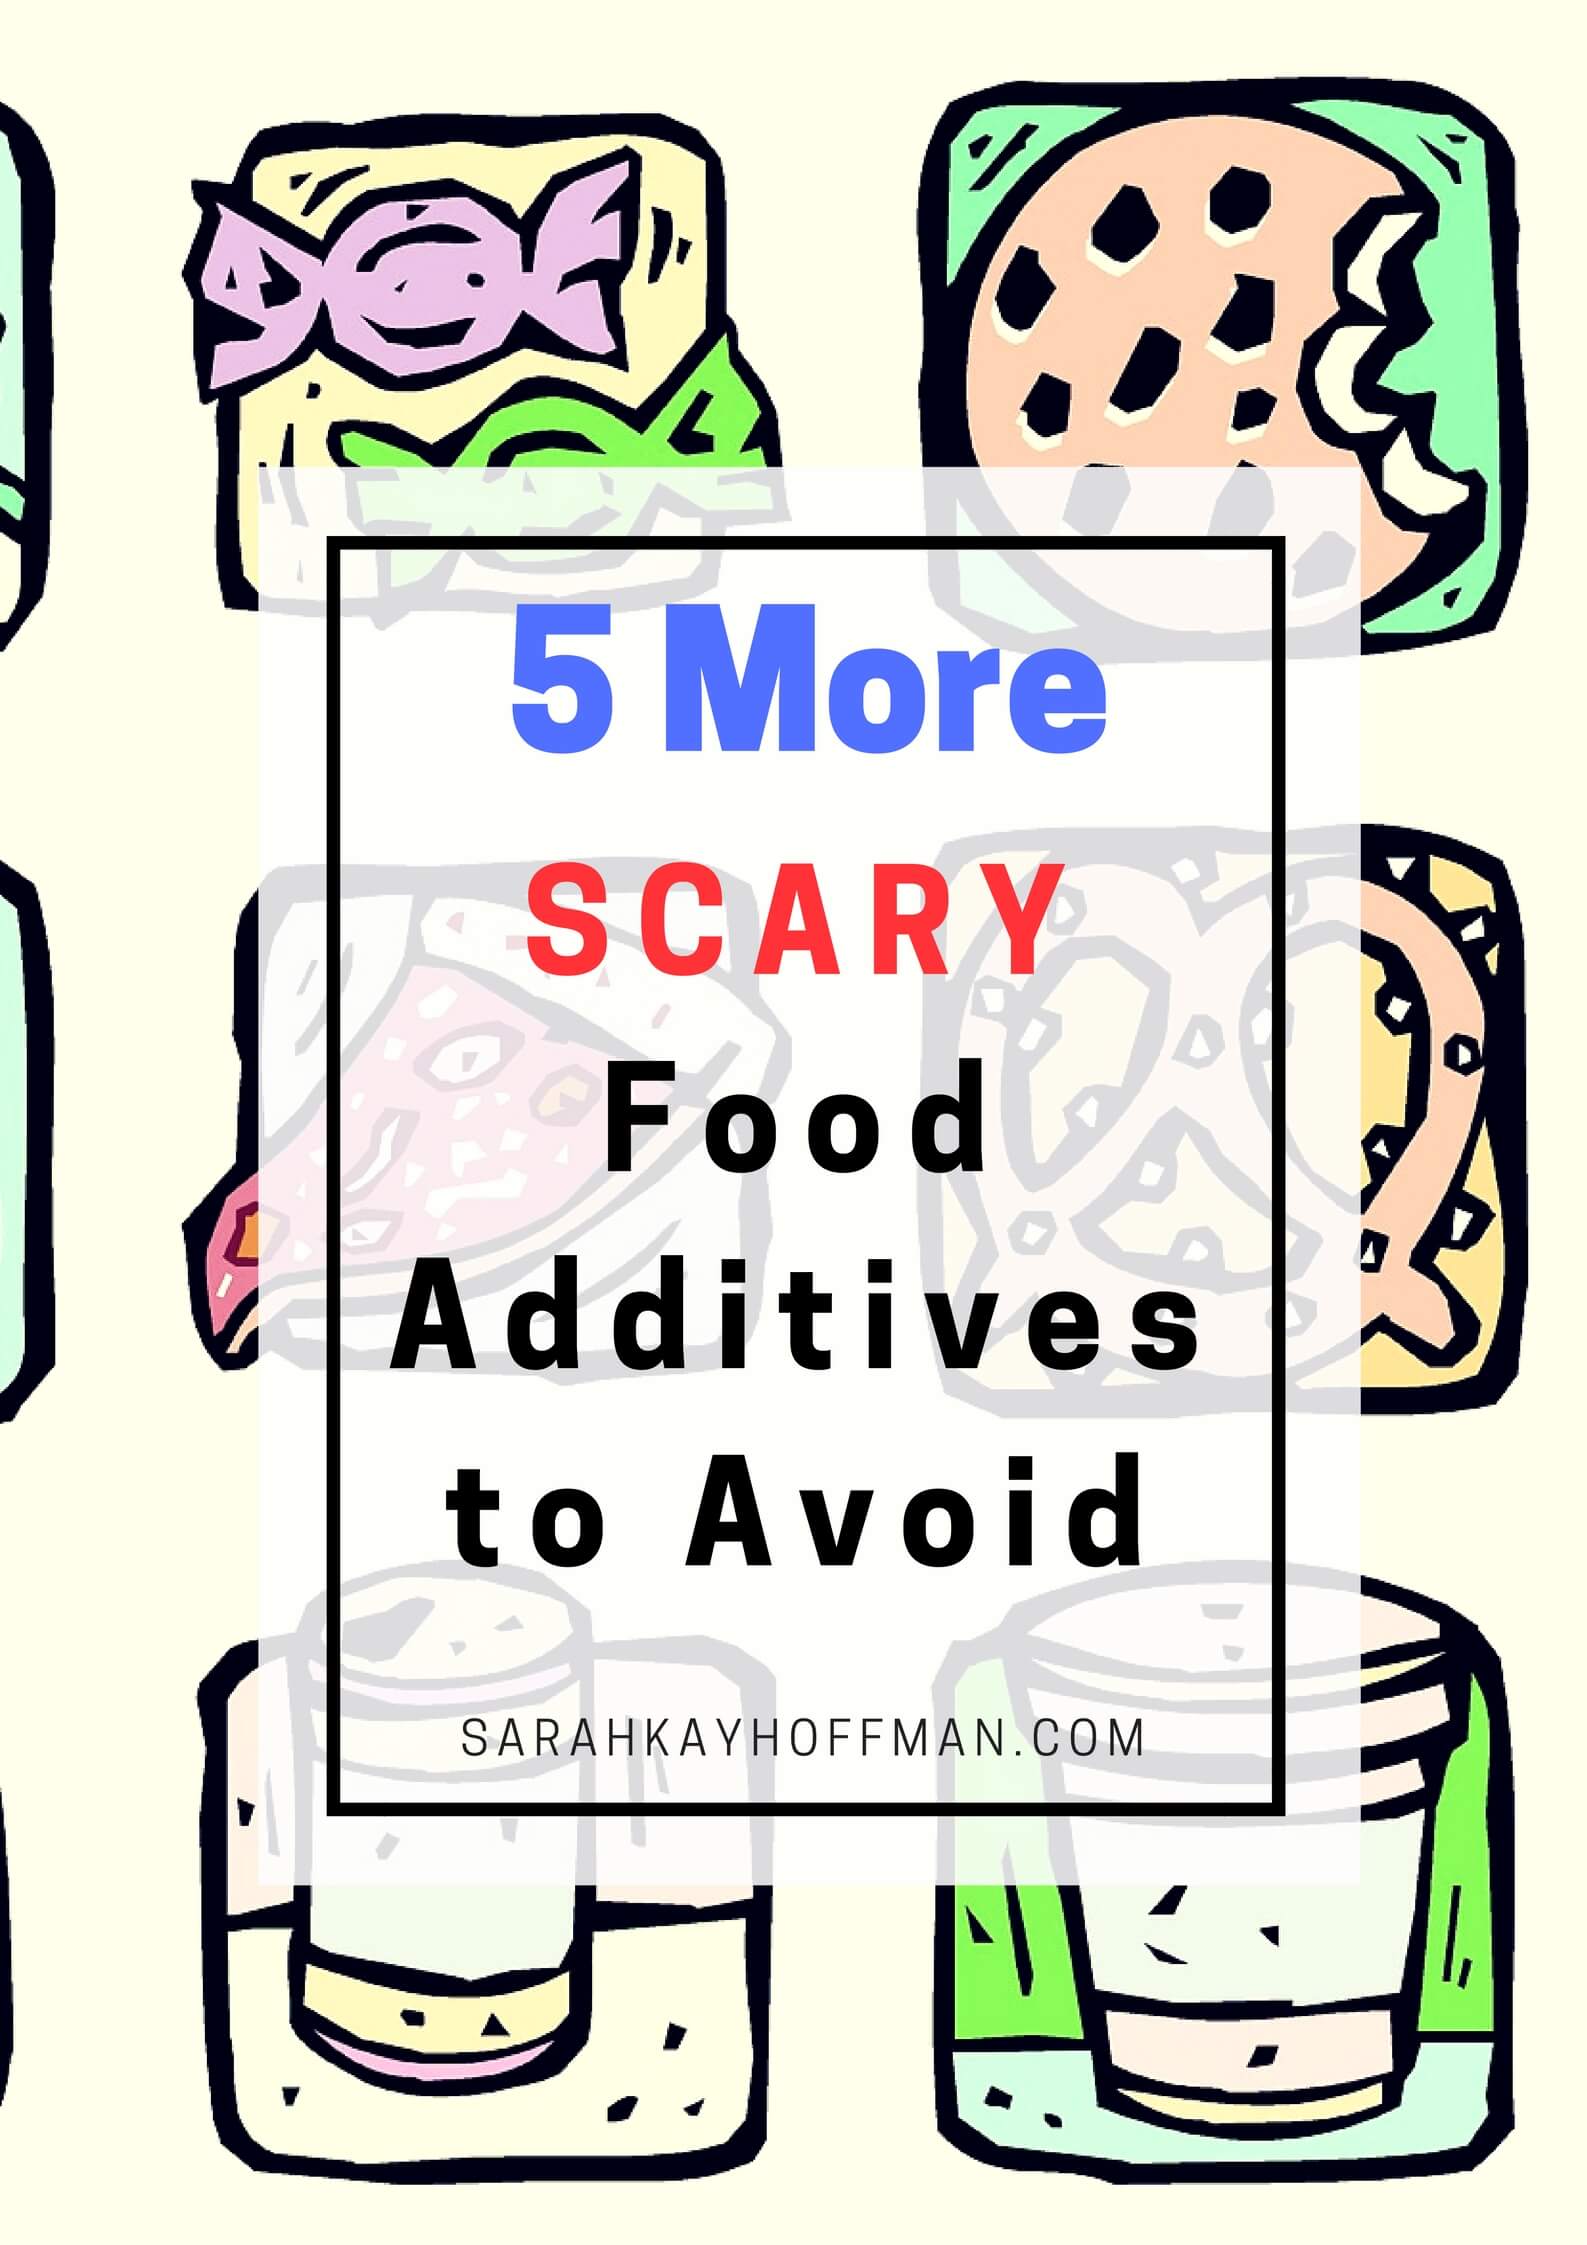 5 More Scary Food Additives to Avoid sarahkayhoffman.com #ibs #healthyliving #guthealth #gmos